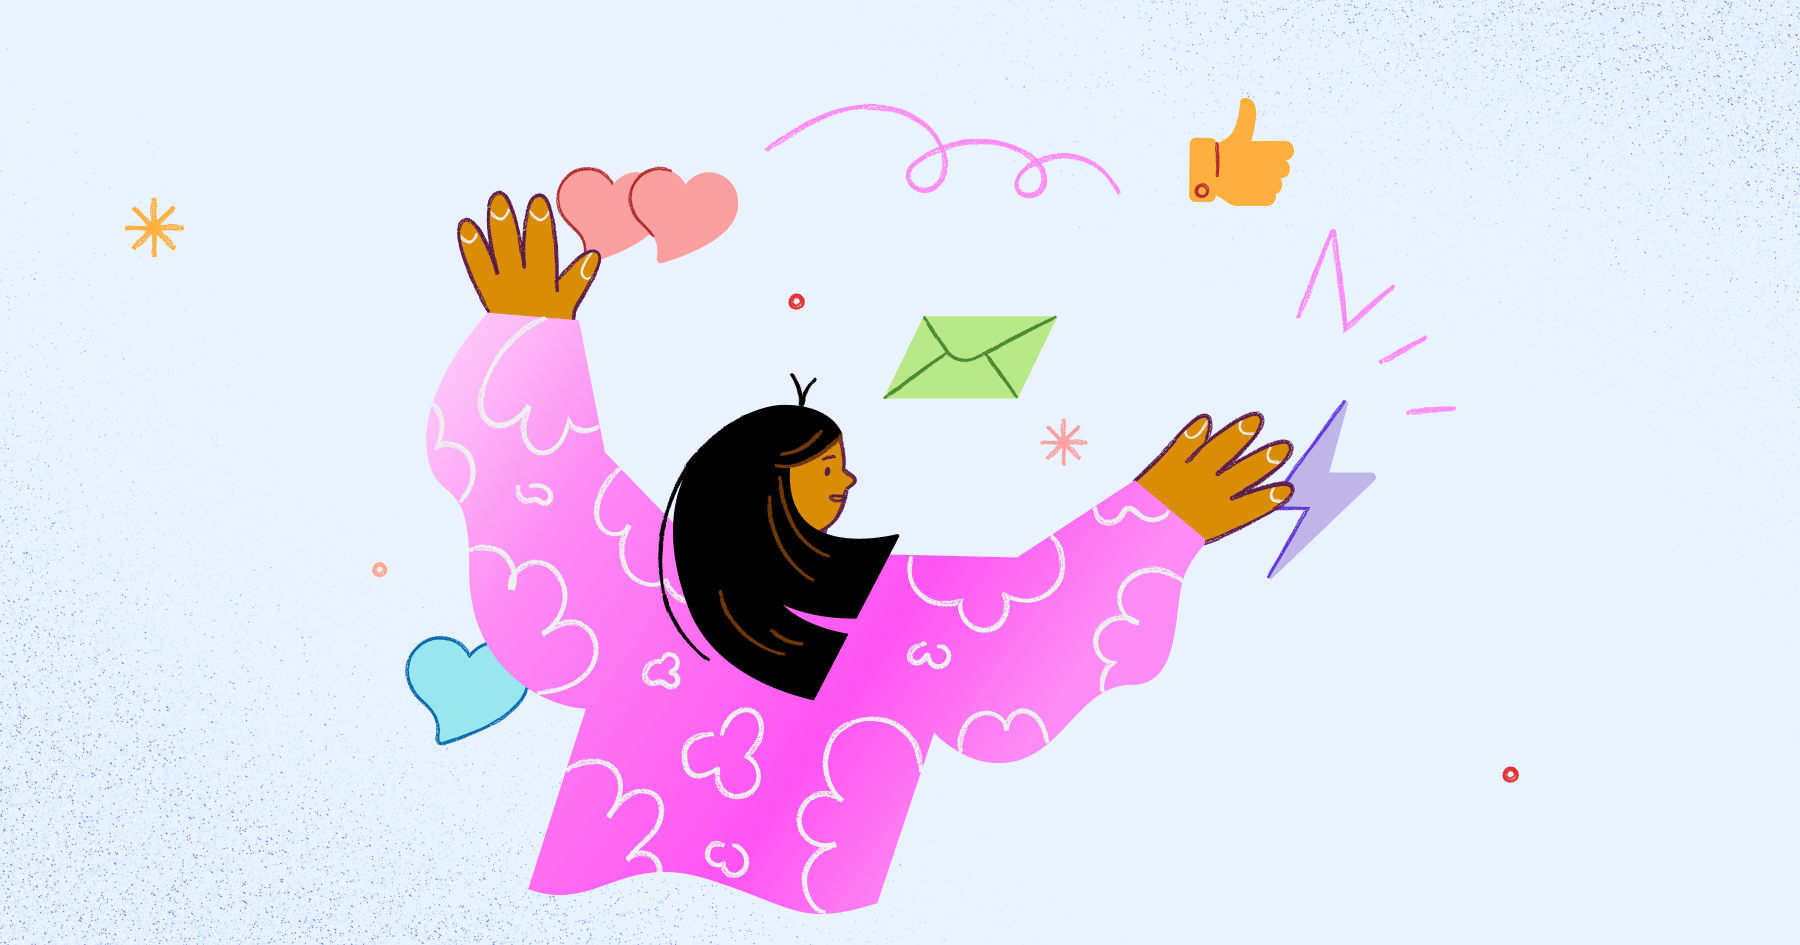 Illustration of a person with arms raised and icons such as hearts, envelope and a thumbs up around them.